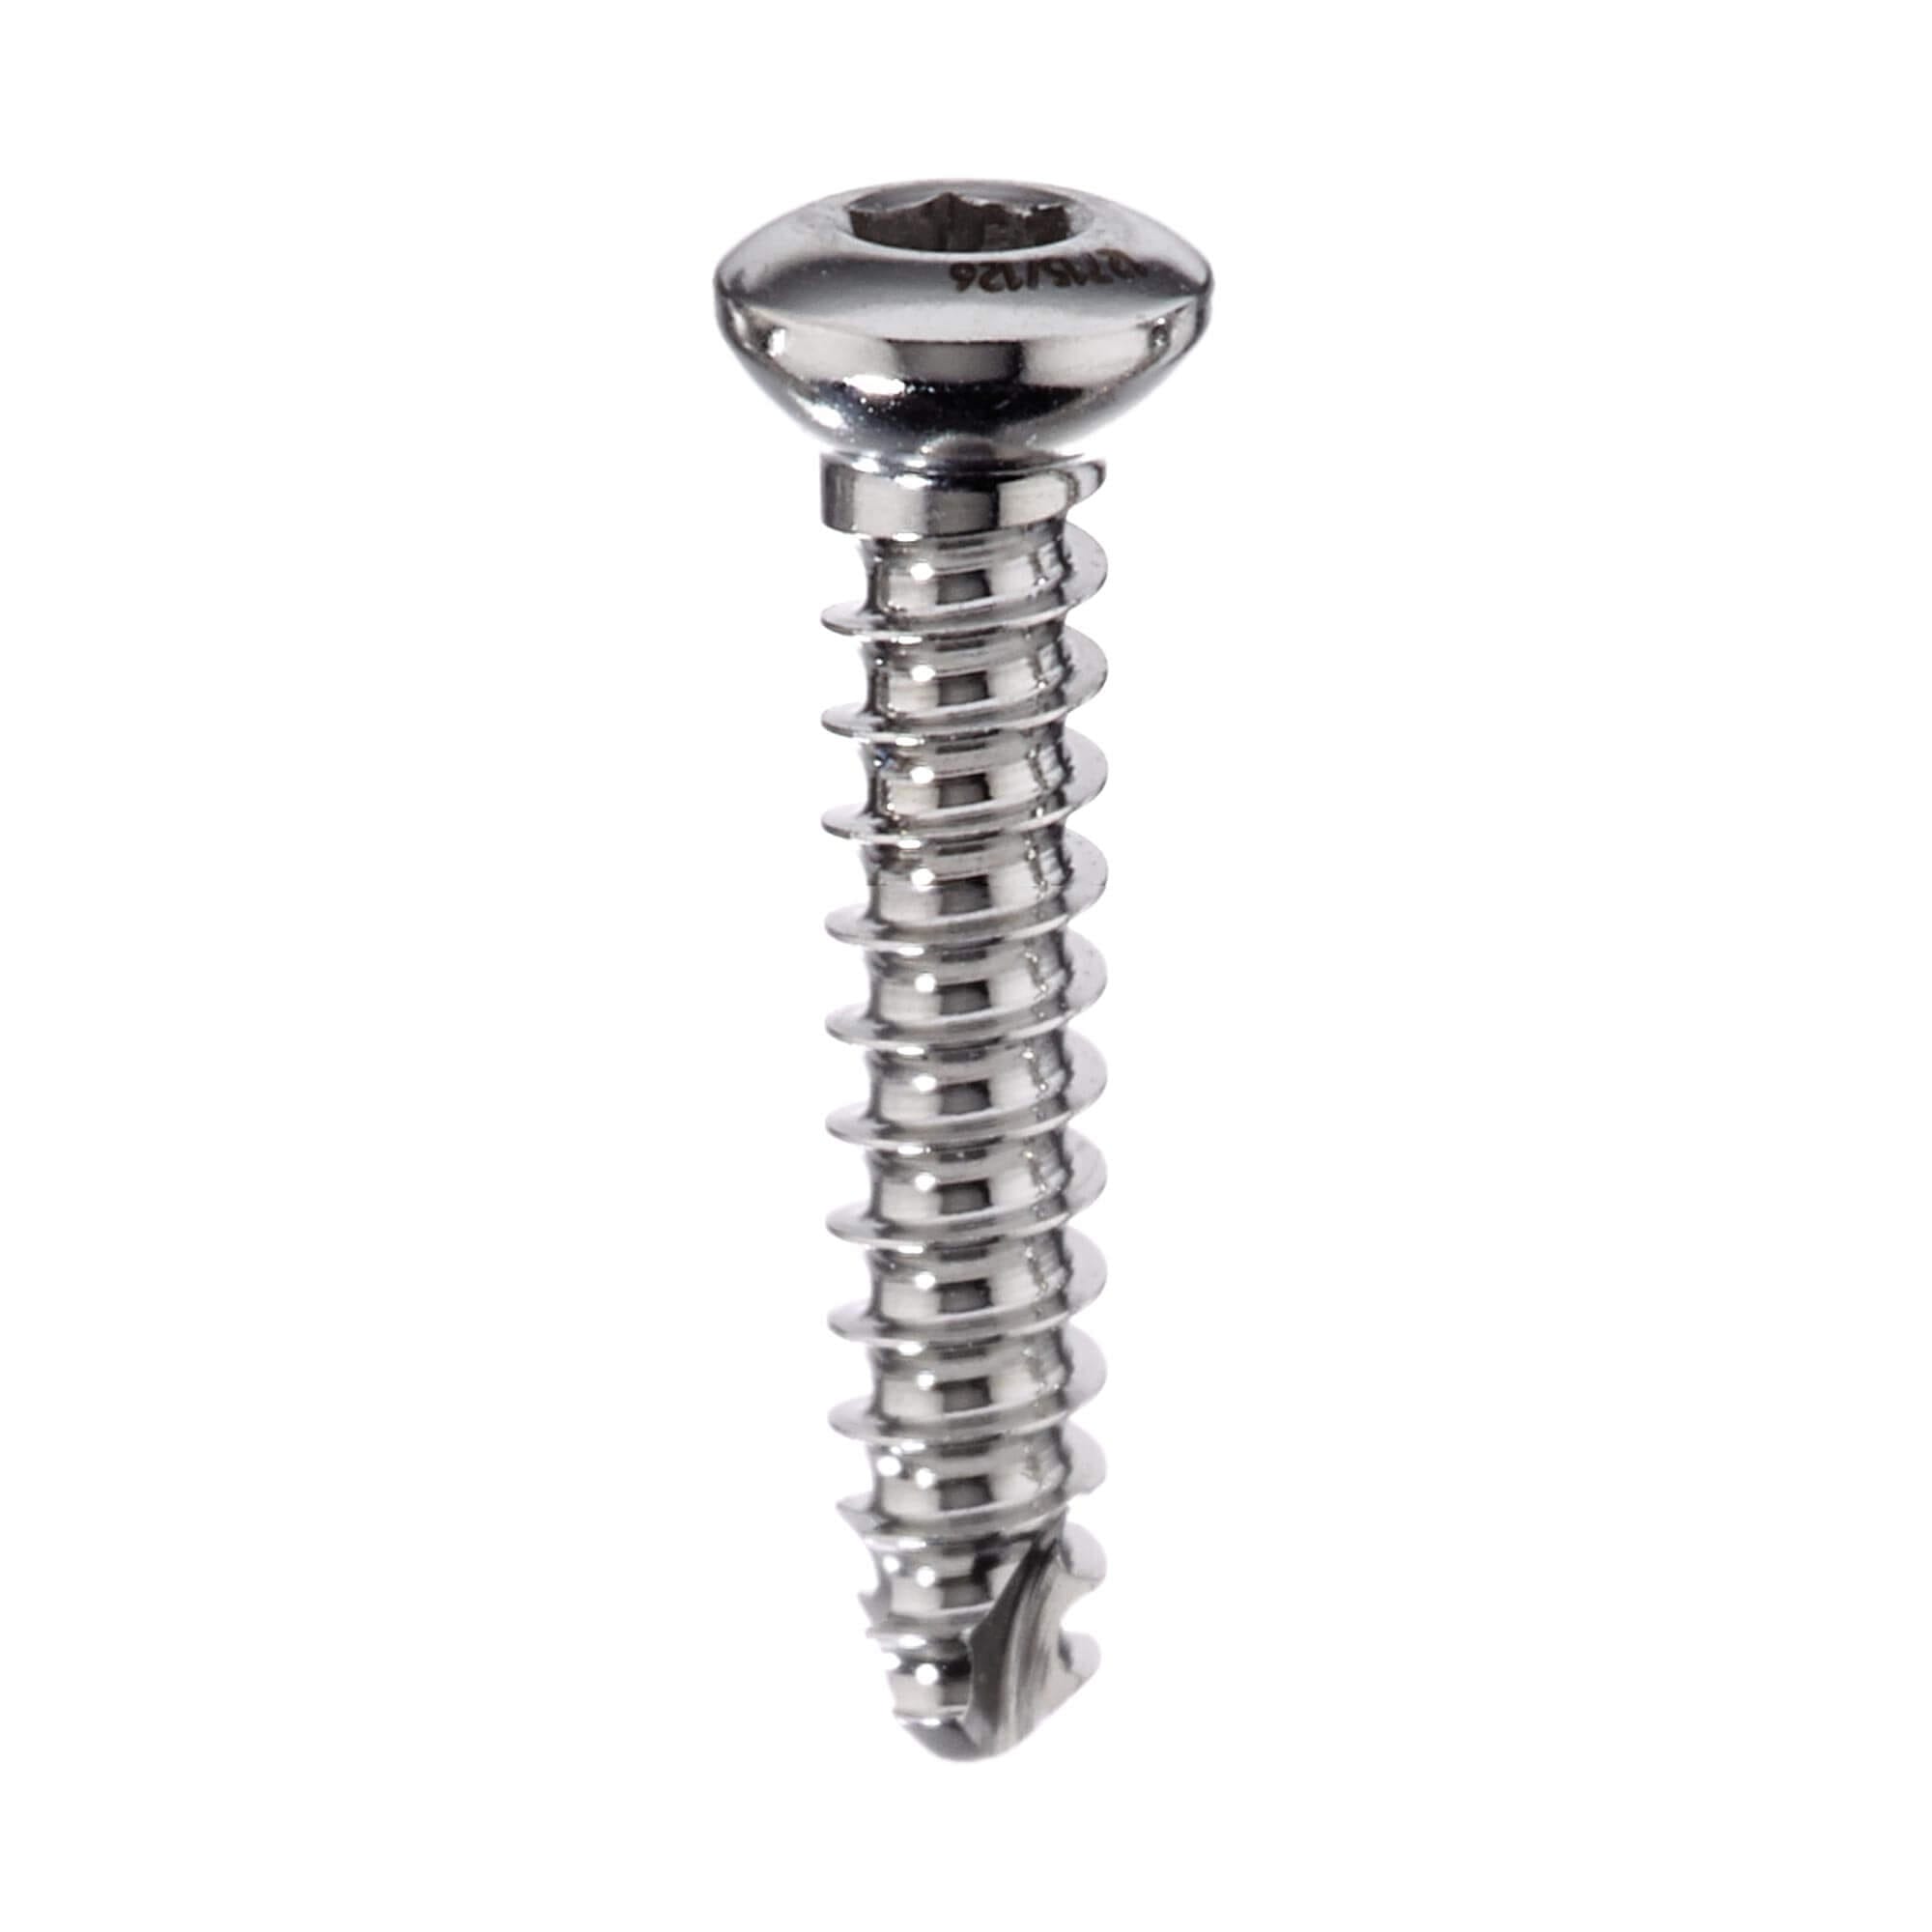 3.5mm Self Tapping Cortical Screw